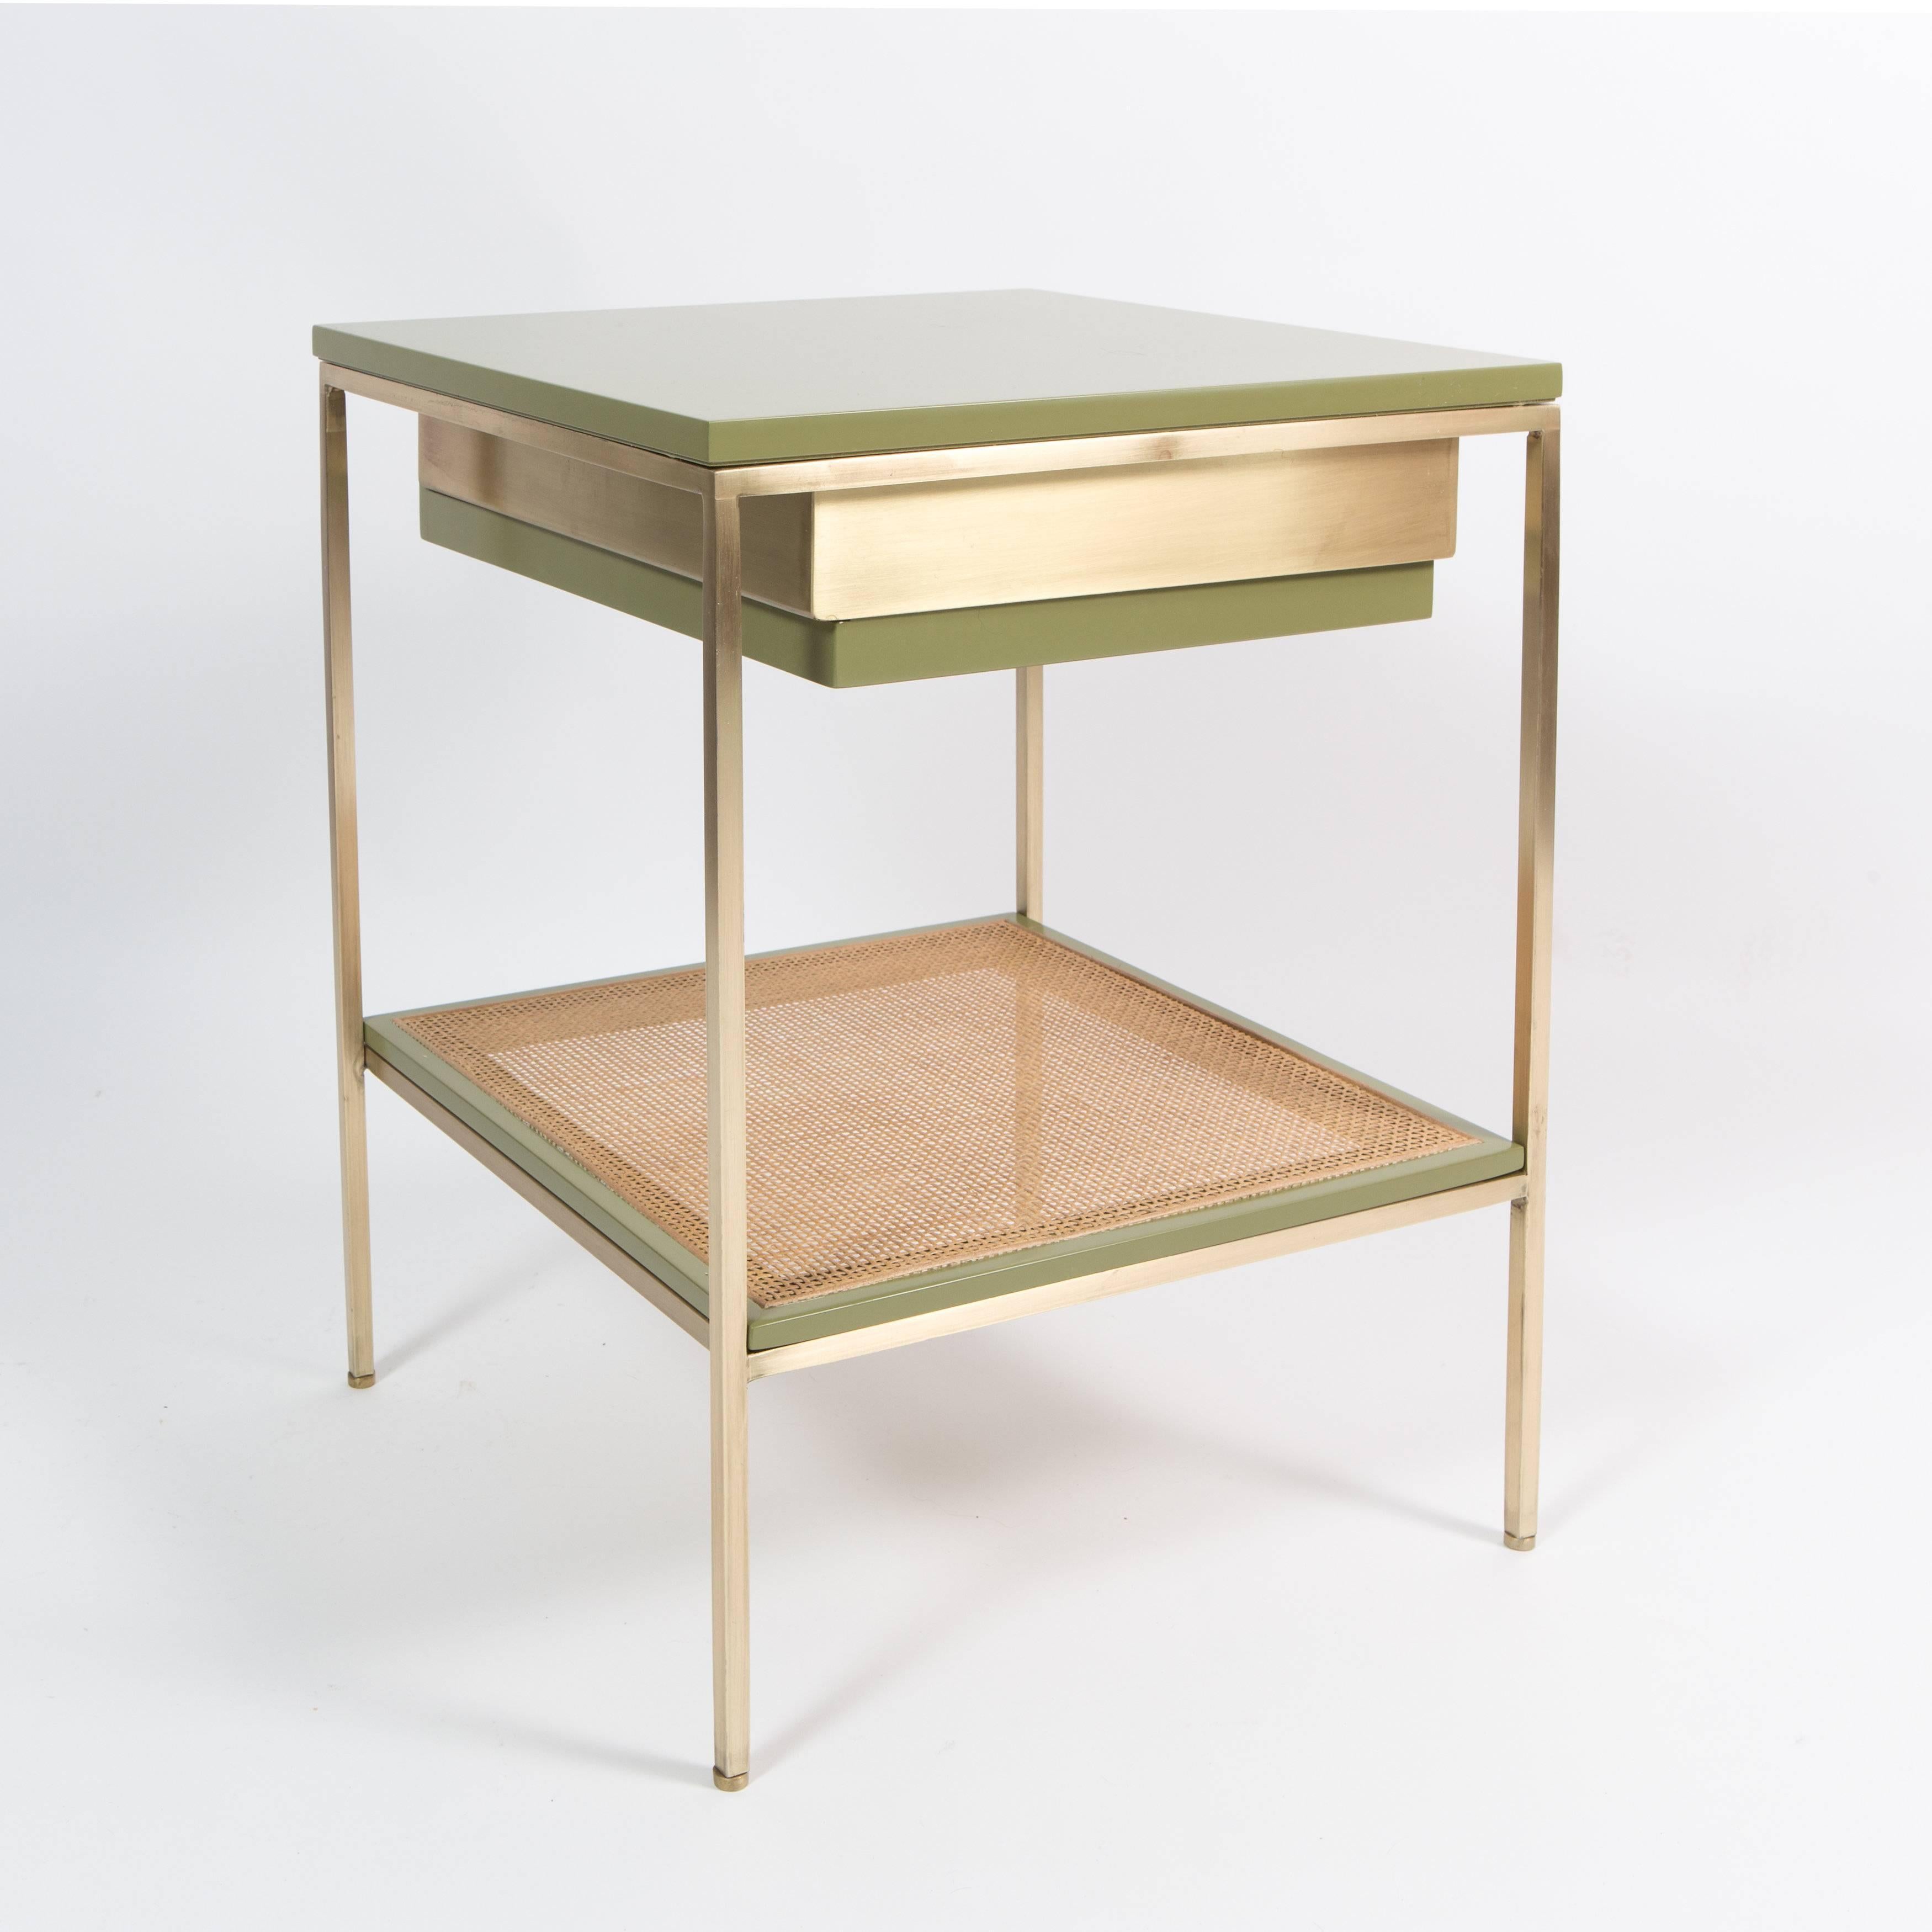 American Re 392 Bedside Table in Kensington Blue on Satin Brass Frame with Caned Shelf For Sale